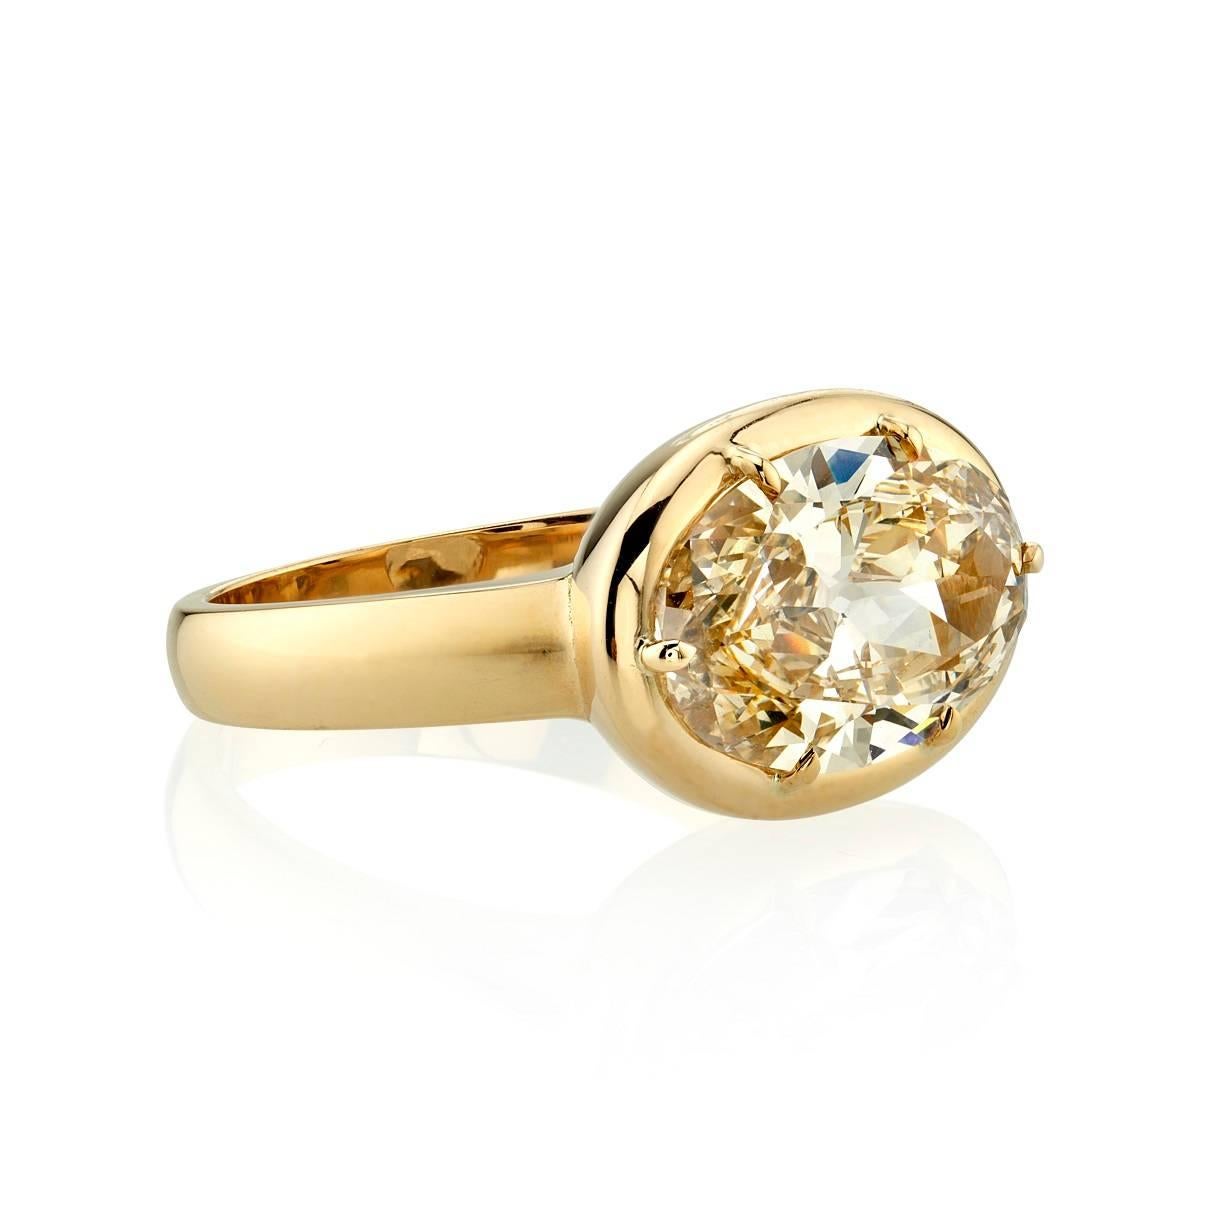 3.58ct M/SI1 EGL certified Moval cut diamond set in a handcrafted 18k yellow gold mounting.  A twist on our signature Cori ring. 